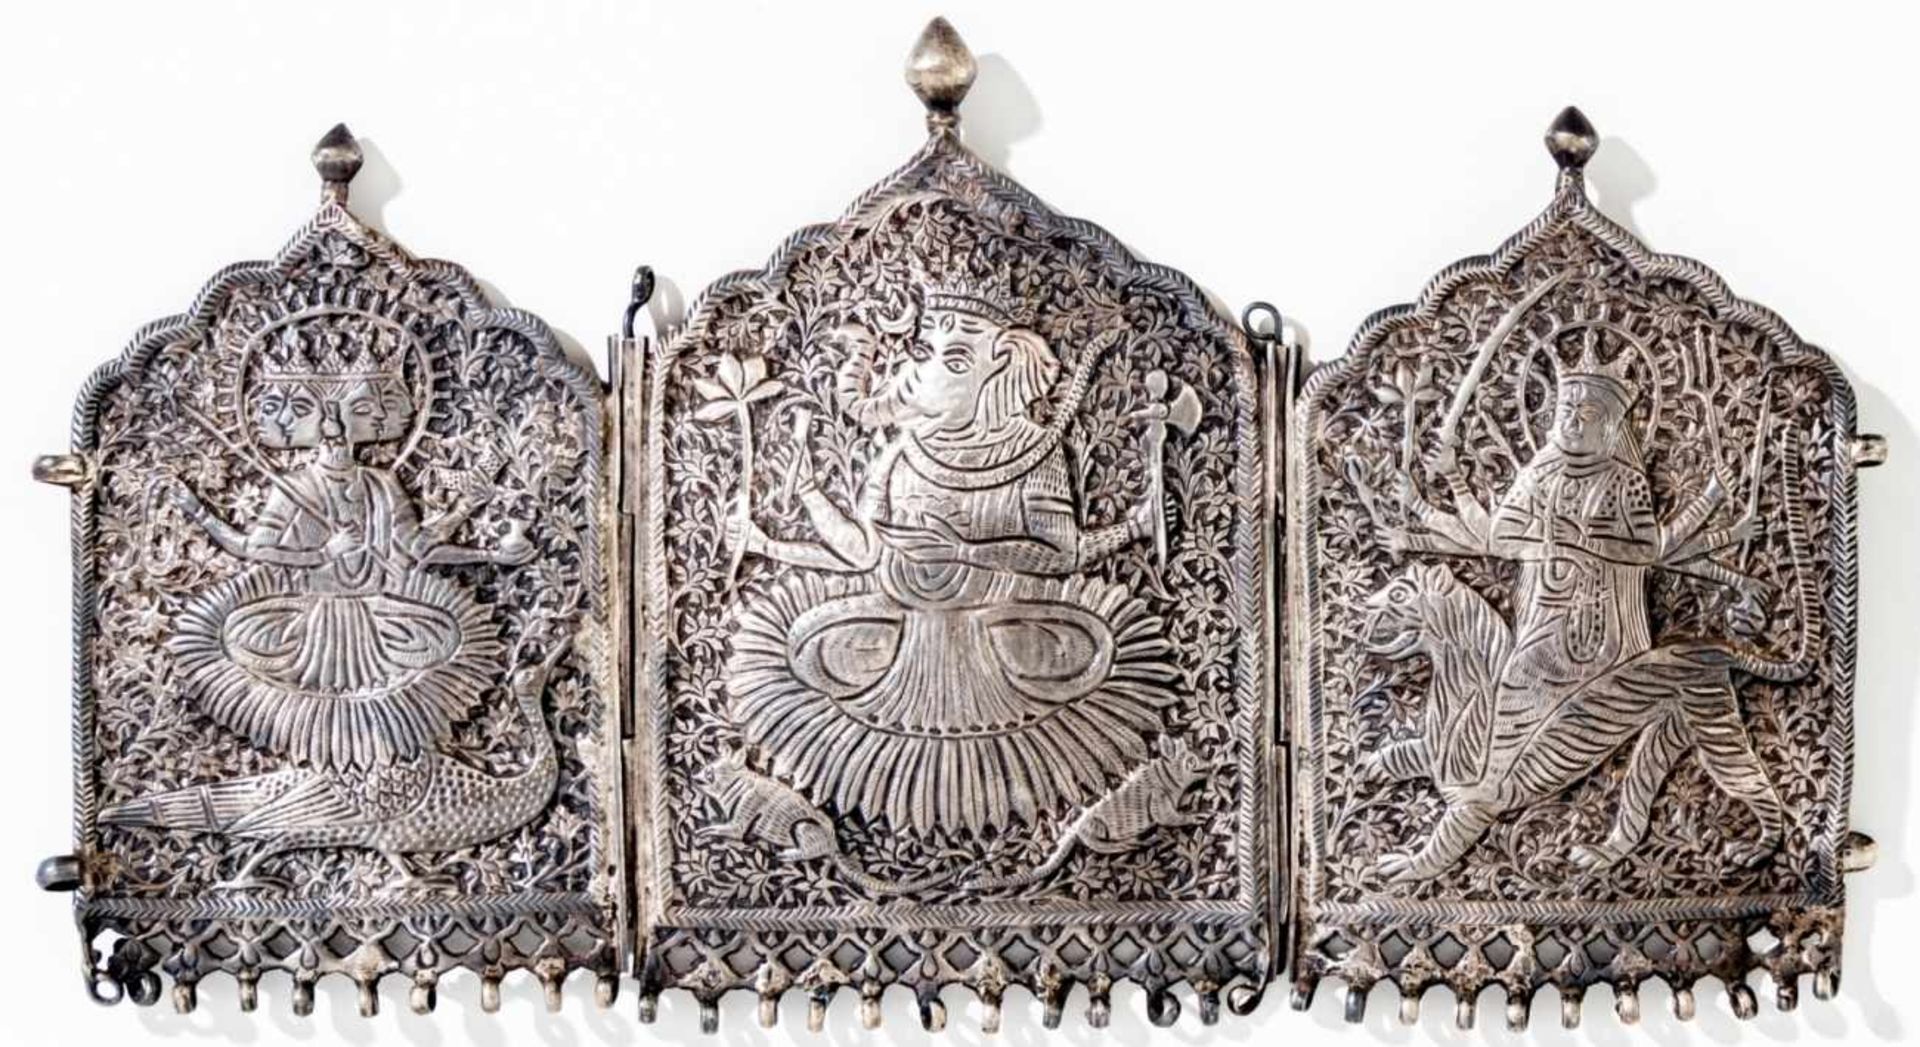 Buddhist Deities, Triptych or part of a polyptych, probably: India, tin (?), c. 1900,opened: 16 x 28